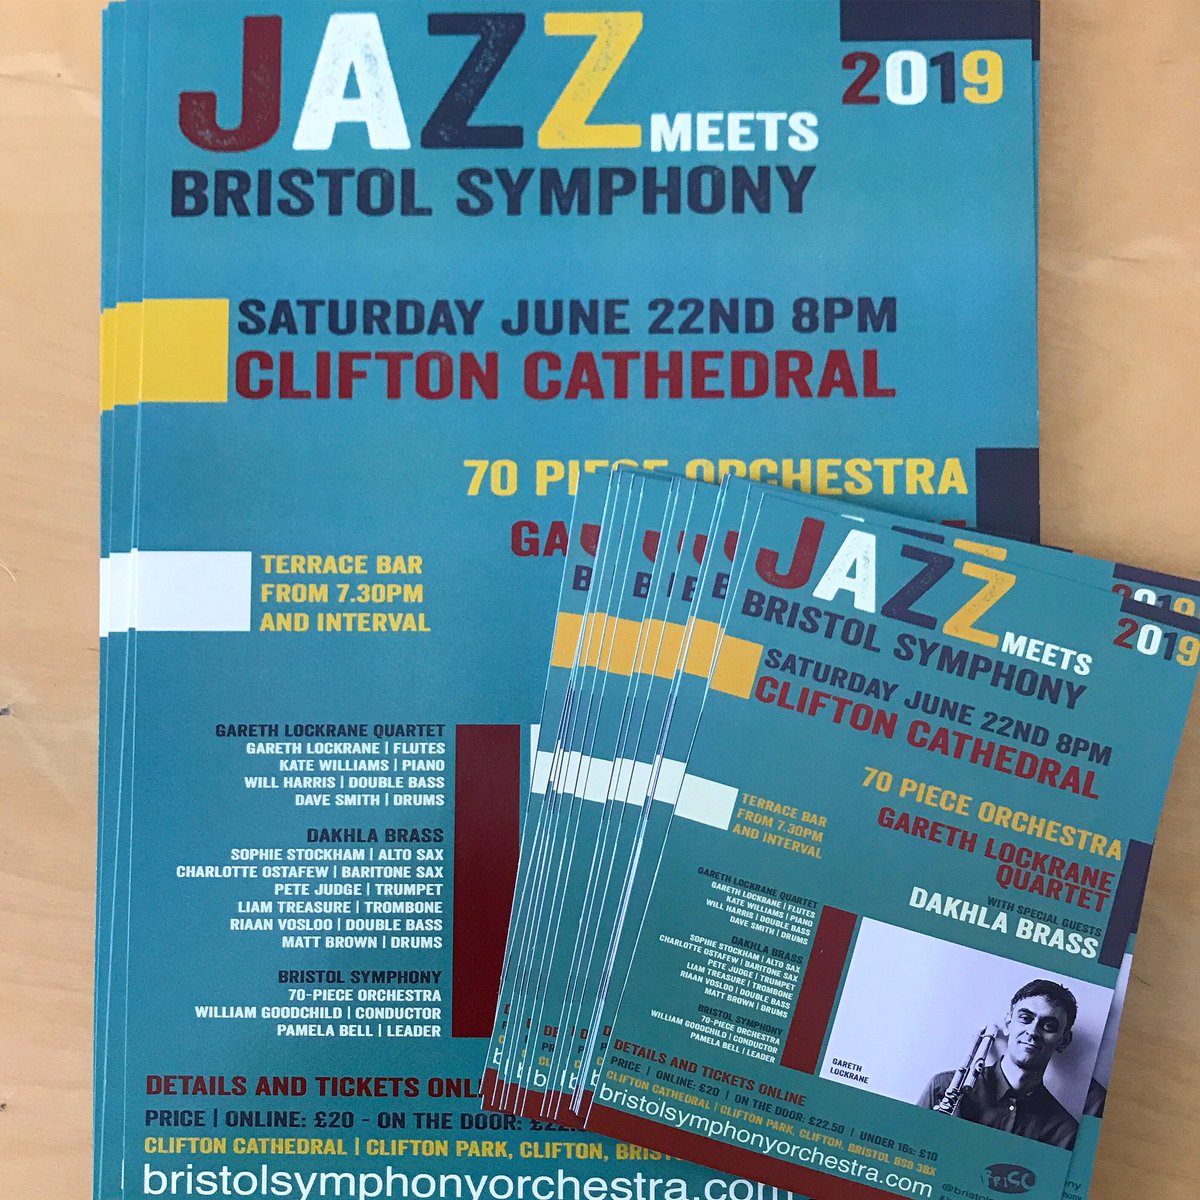 Flyers & posters have just arrived for our June concert with @gareth_lockrane, @katewpiano, @dakhlabrass & @wgoodchildmusic  #jazzmeetsbristolsymphony #jazz #concert #Bristol  #concertpromotion #MusicPromotion 
#design by @RachelGoodchild